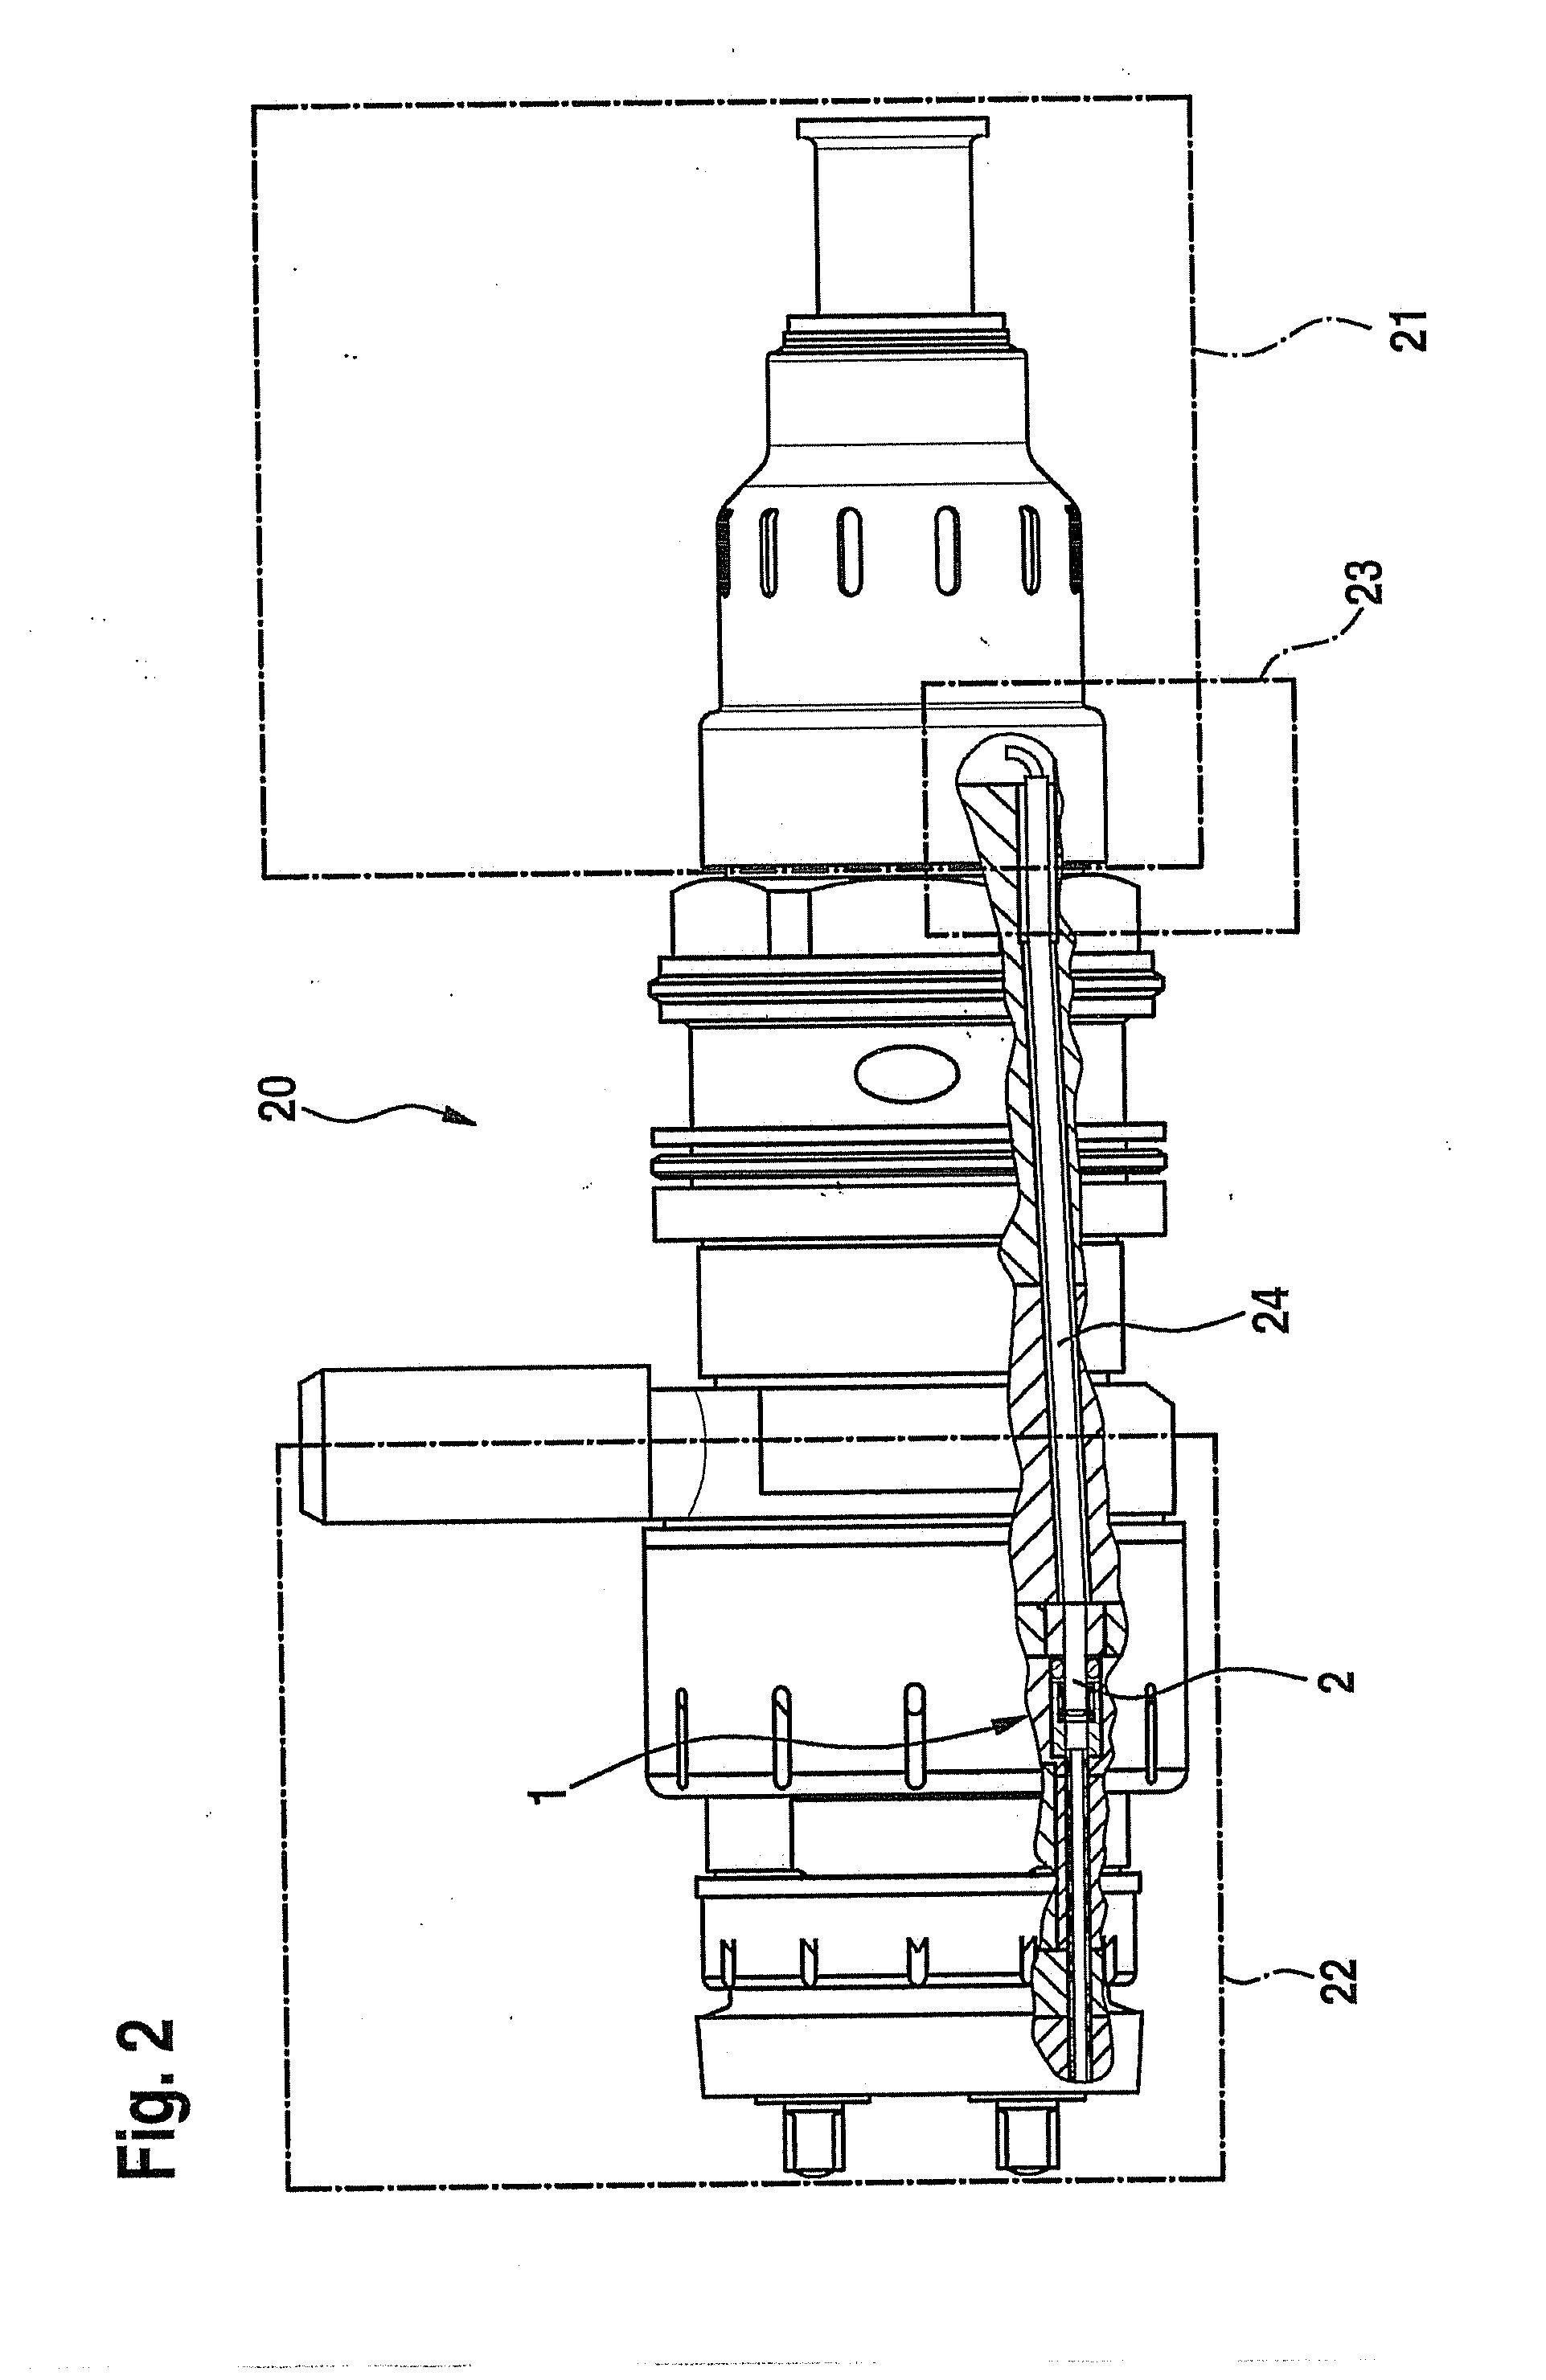 Electrical plug connector as fuel injector contact for shakeproof applications